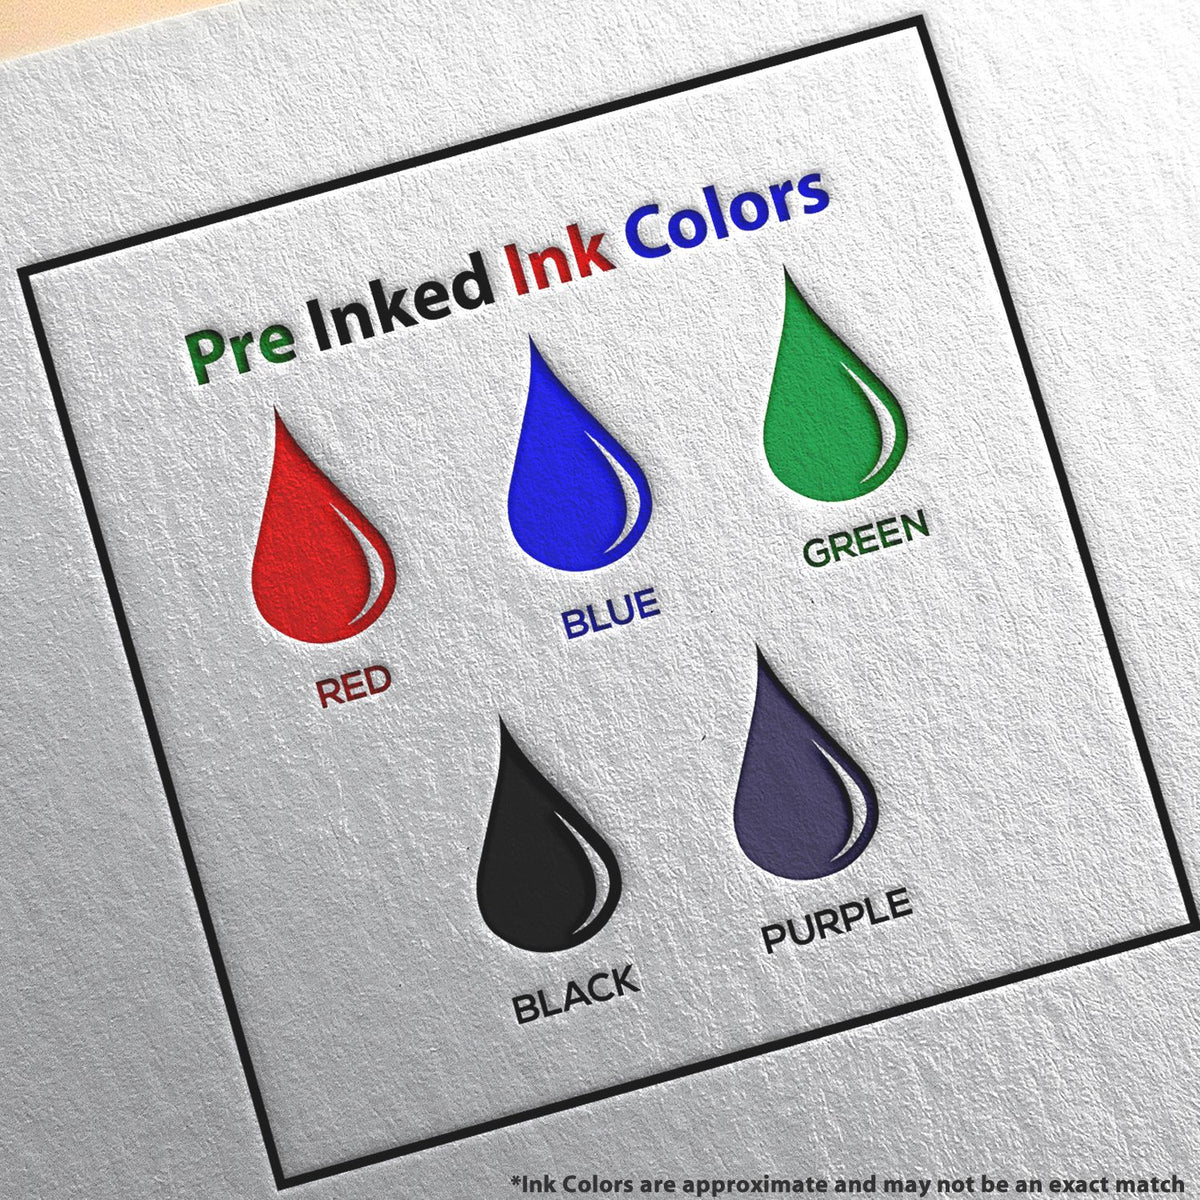 A picture showing the different ink colors or hues available for the Slim Pre-Inked Virginia Land Surveyor Seal Stamp product.